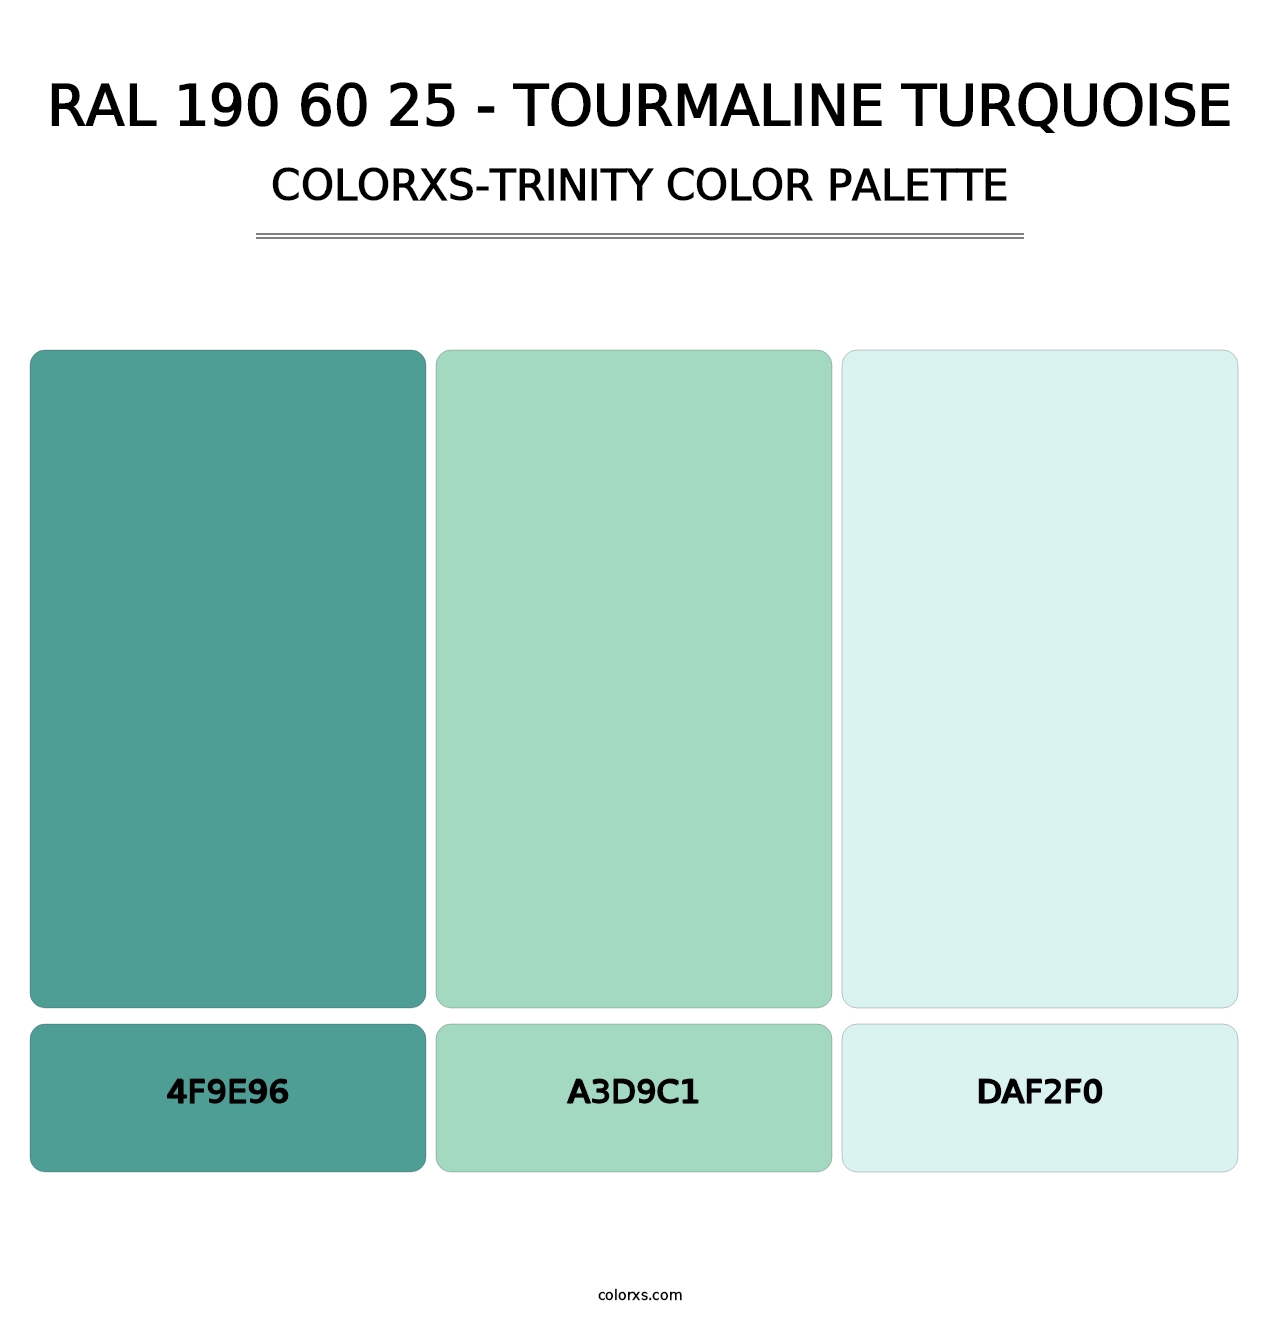 RAL 190 60 25 - Tourmaline Turquoise - Colorxs Trinity Palette